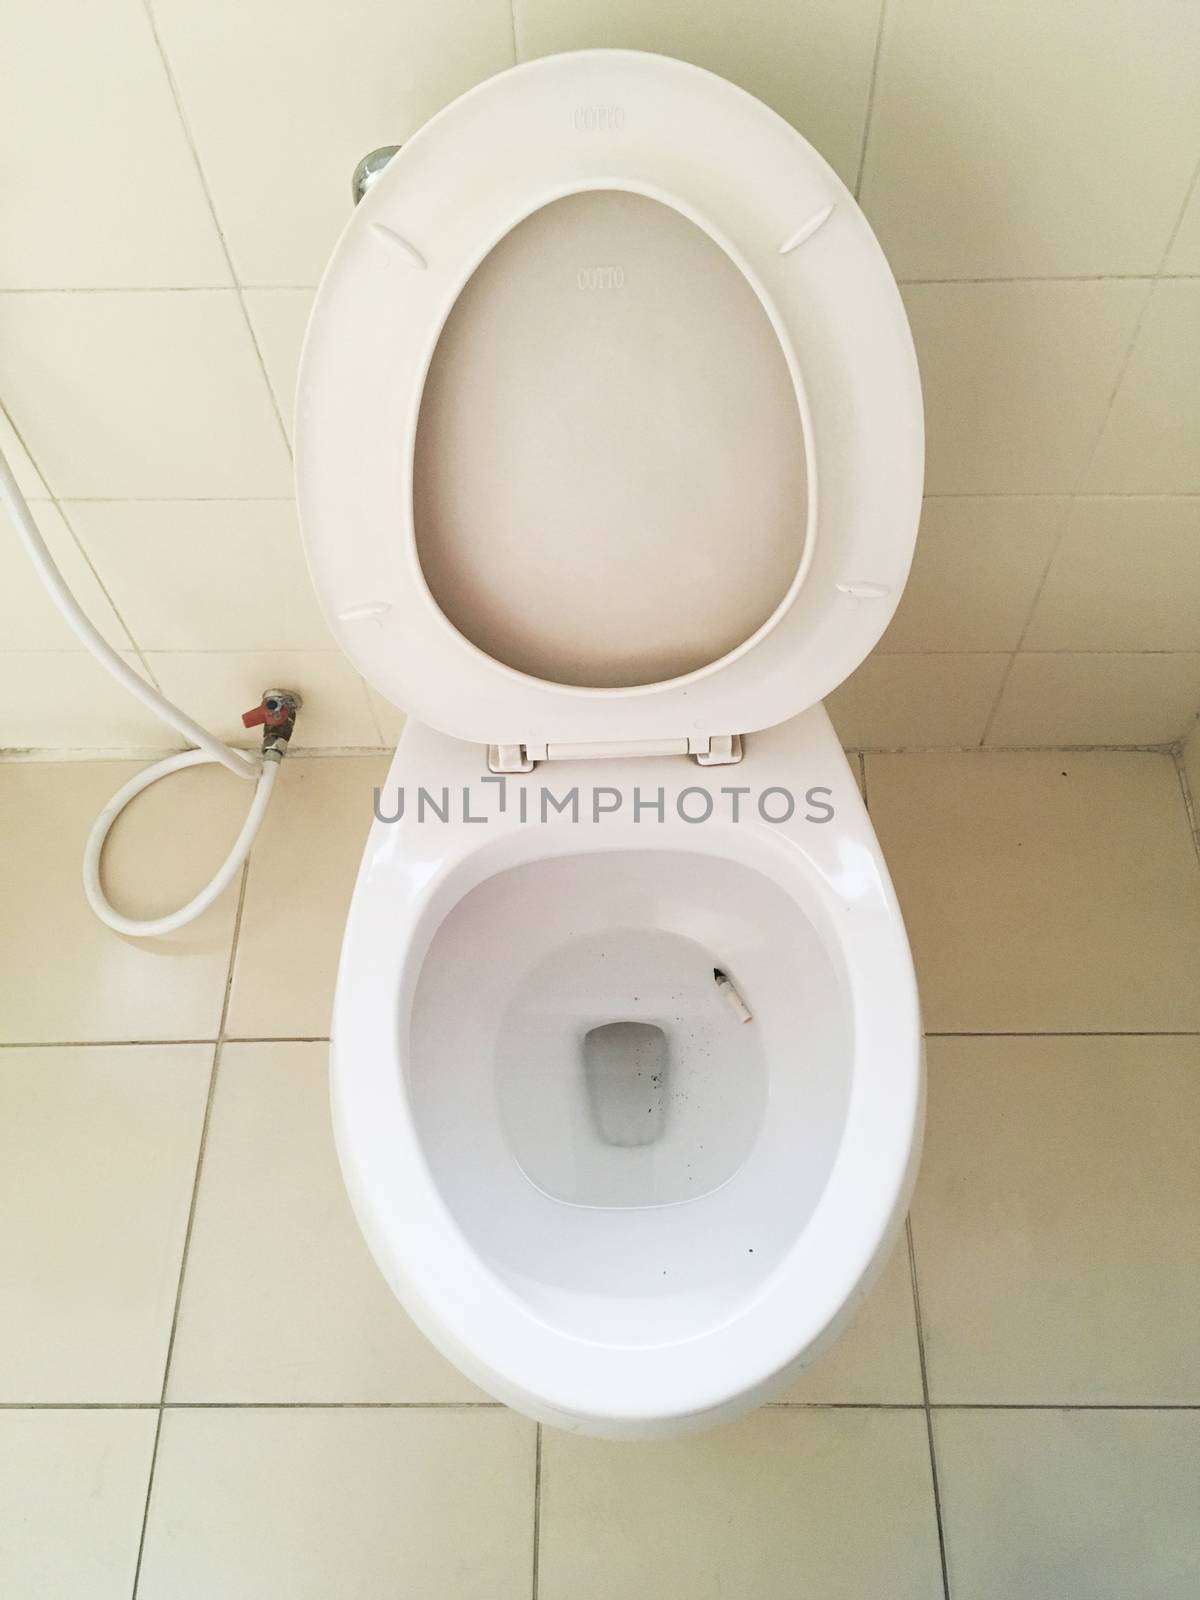 Cigarettes in the toilet by phochi